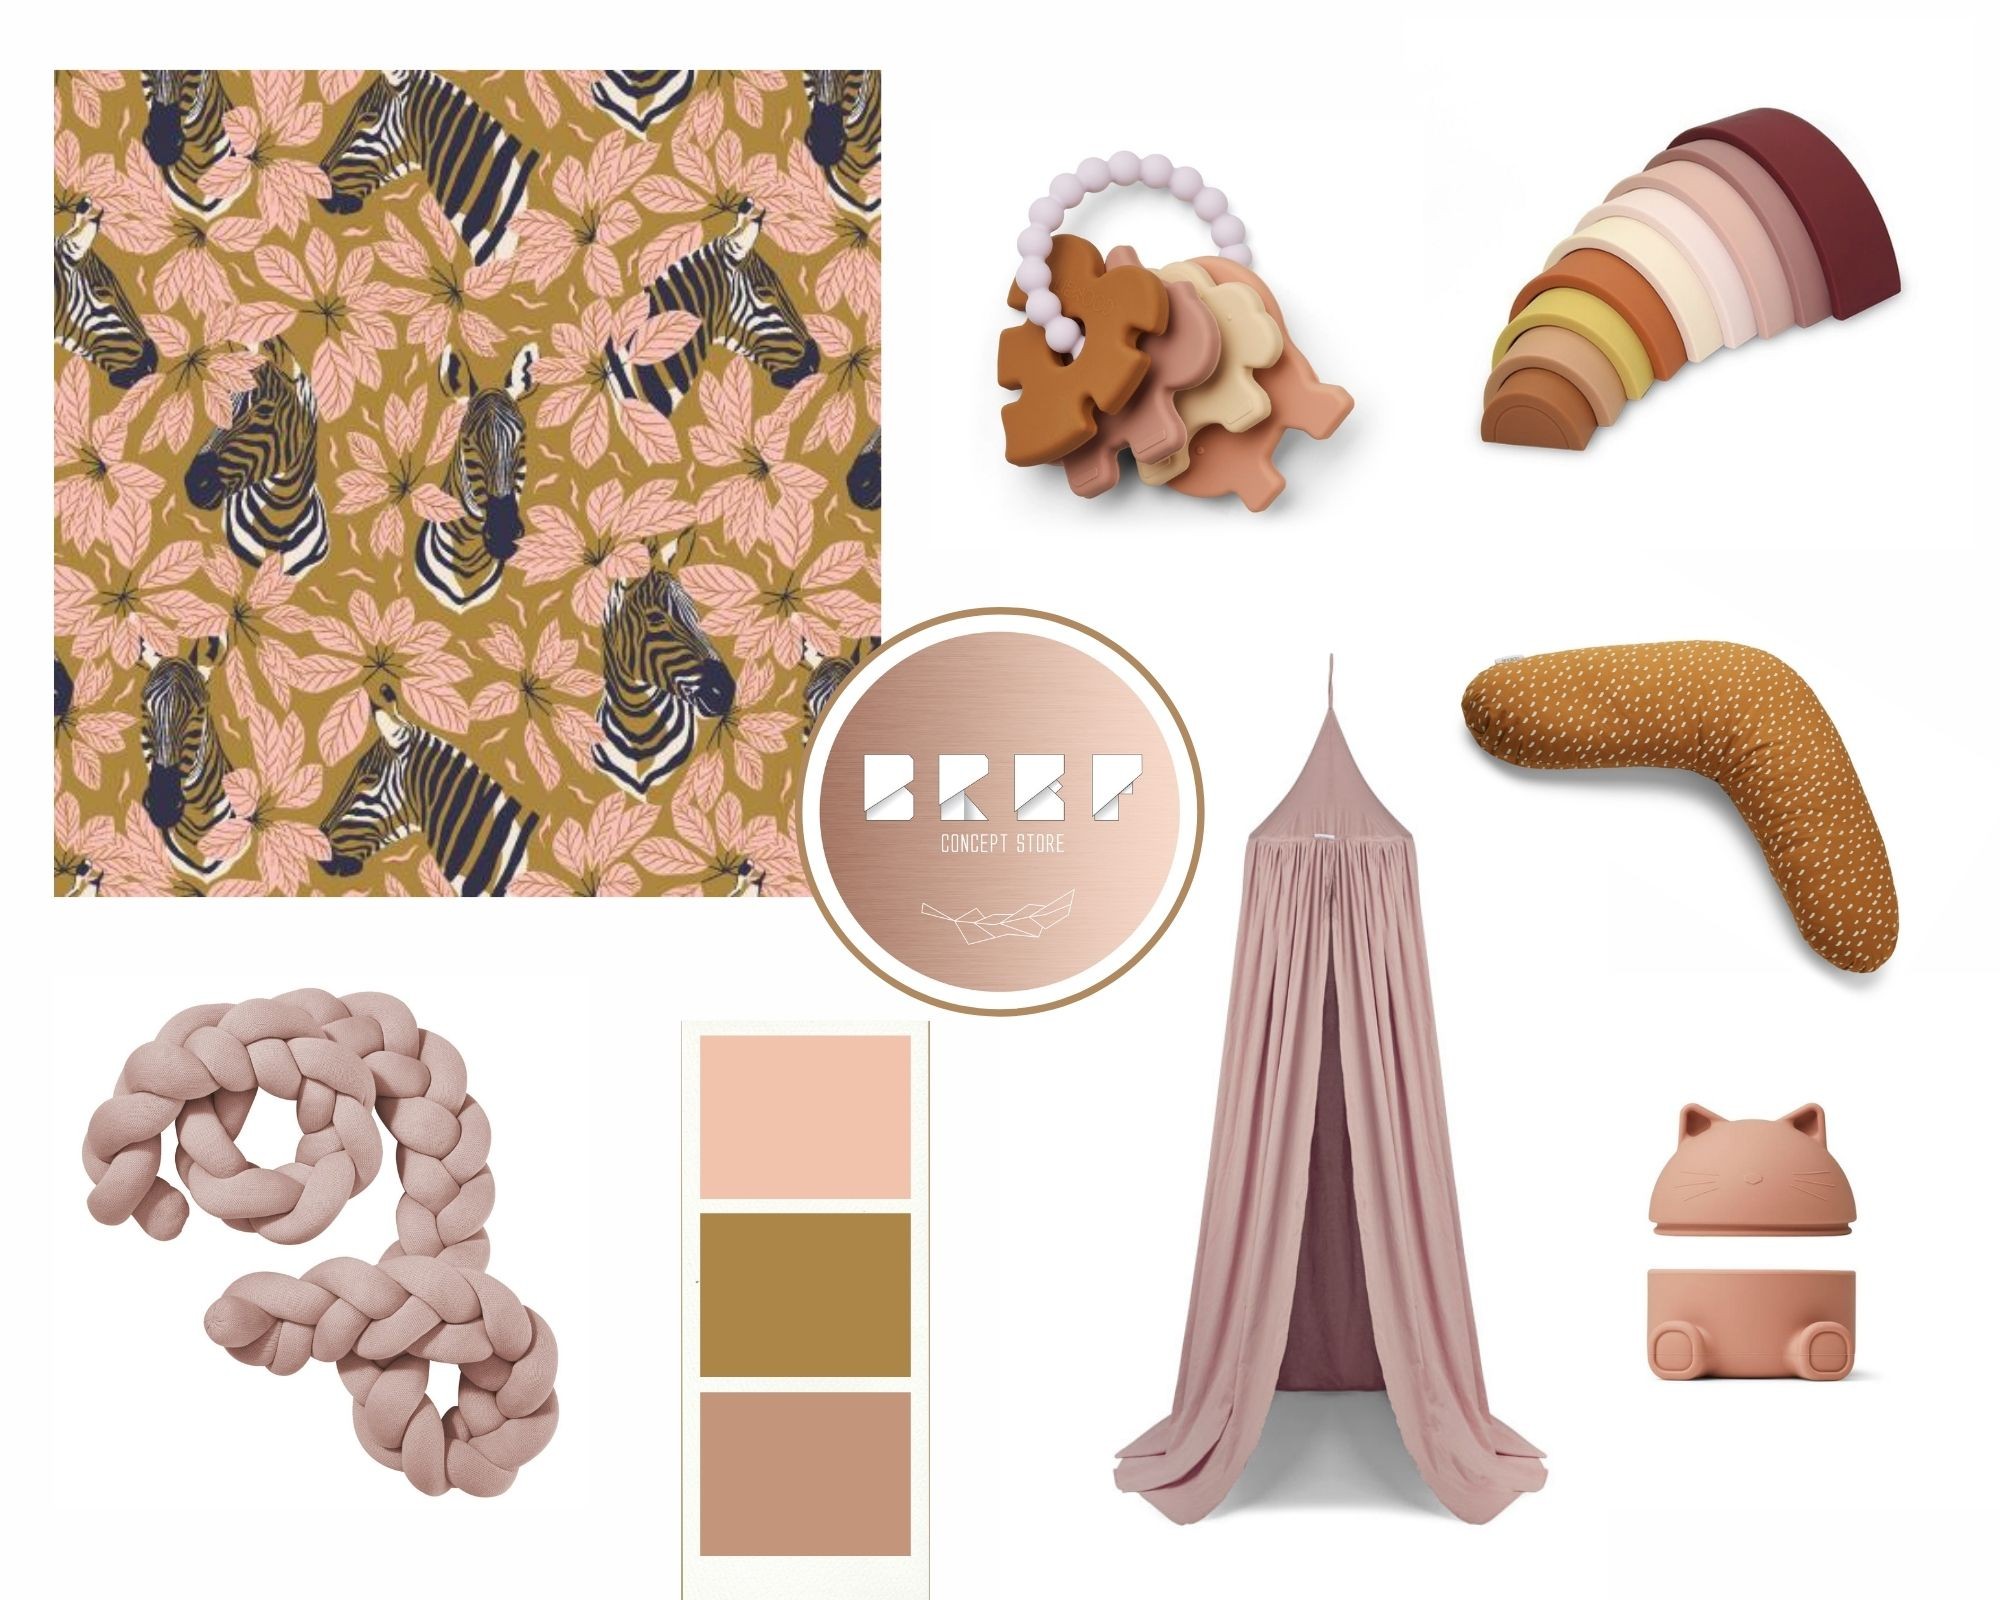 Brown Soft and Dainty Fashion Moodboard Photo Collage (3)